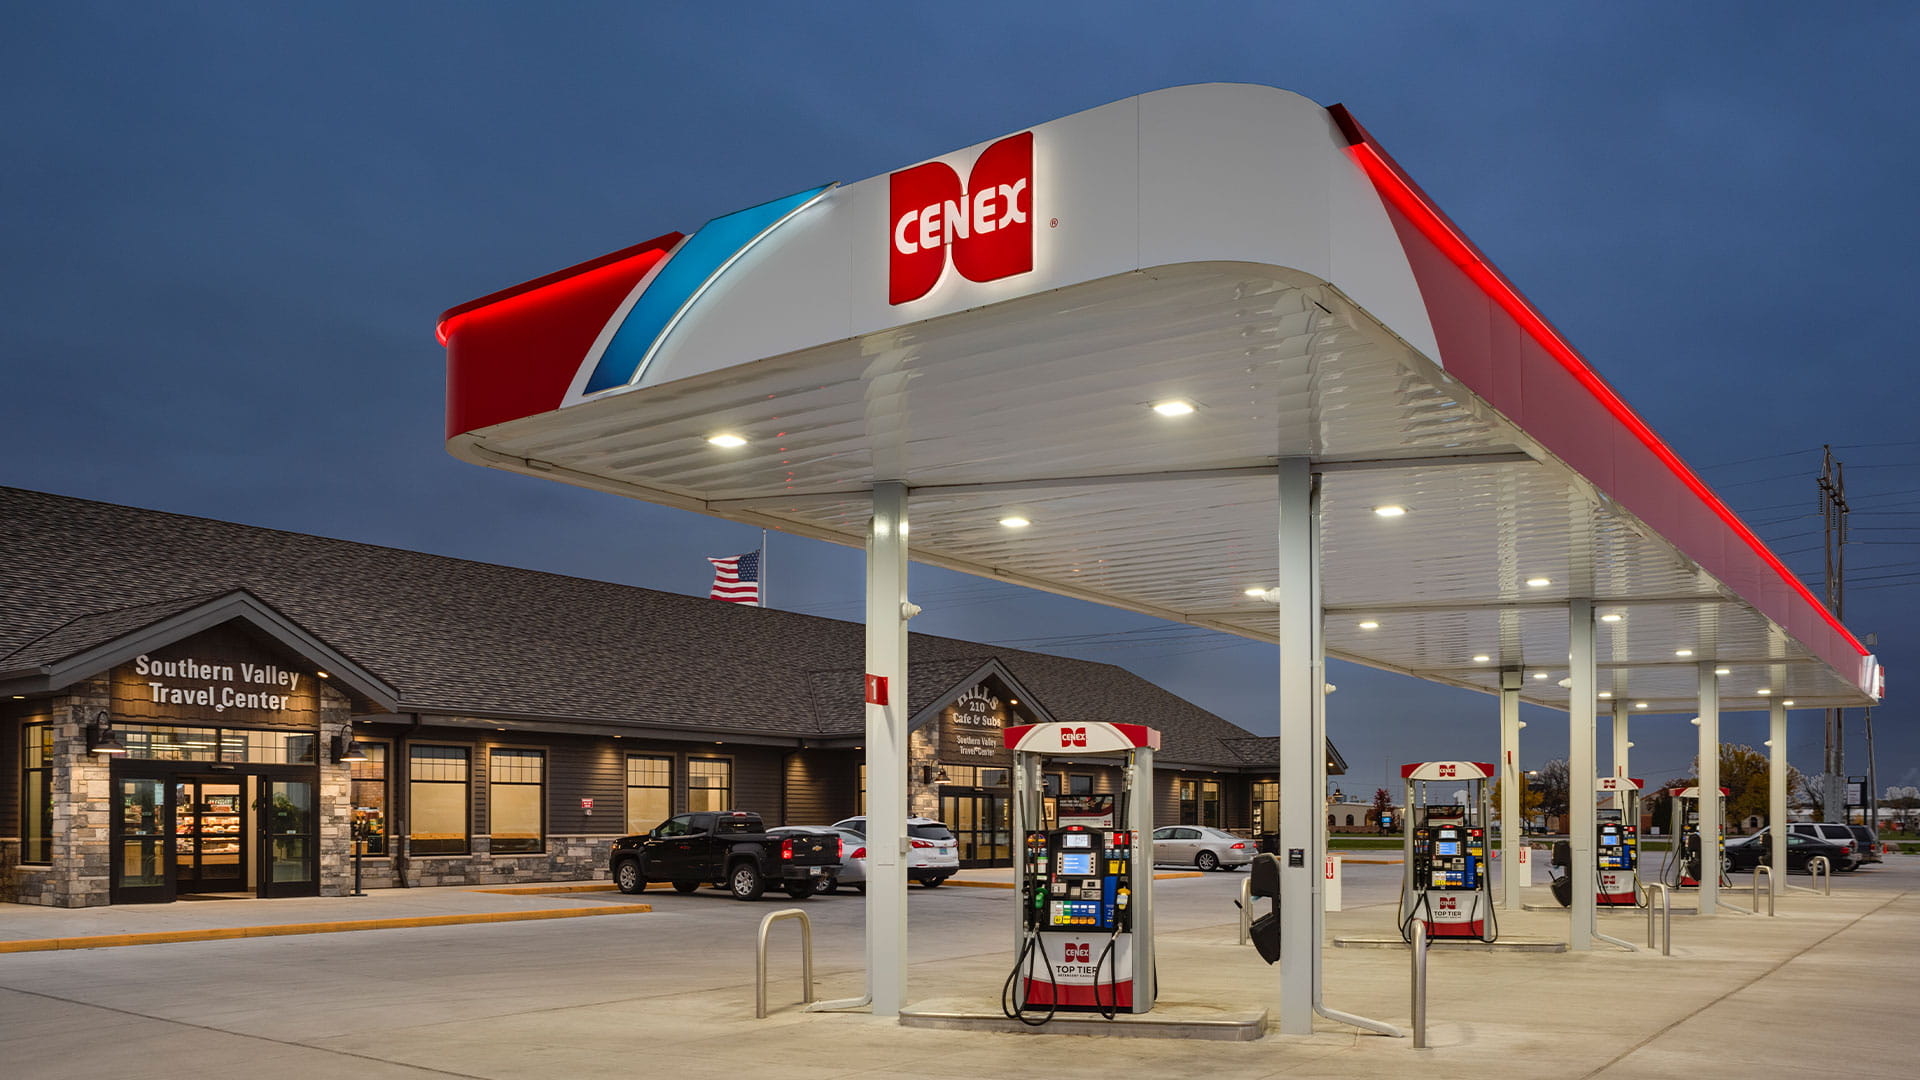 Cenex gas stations in early evening